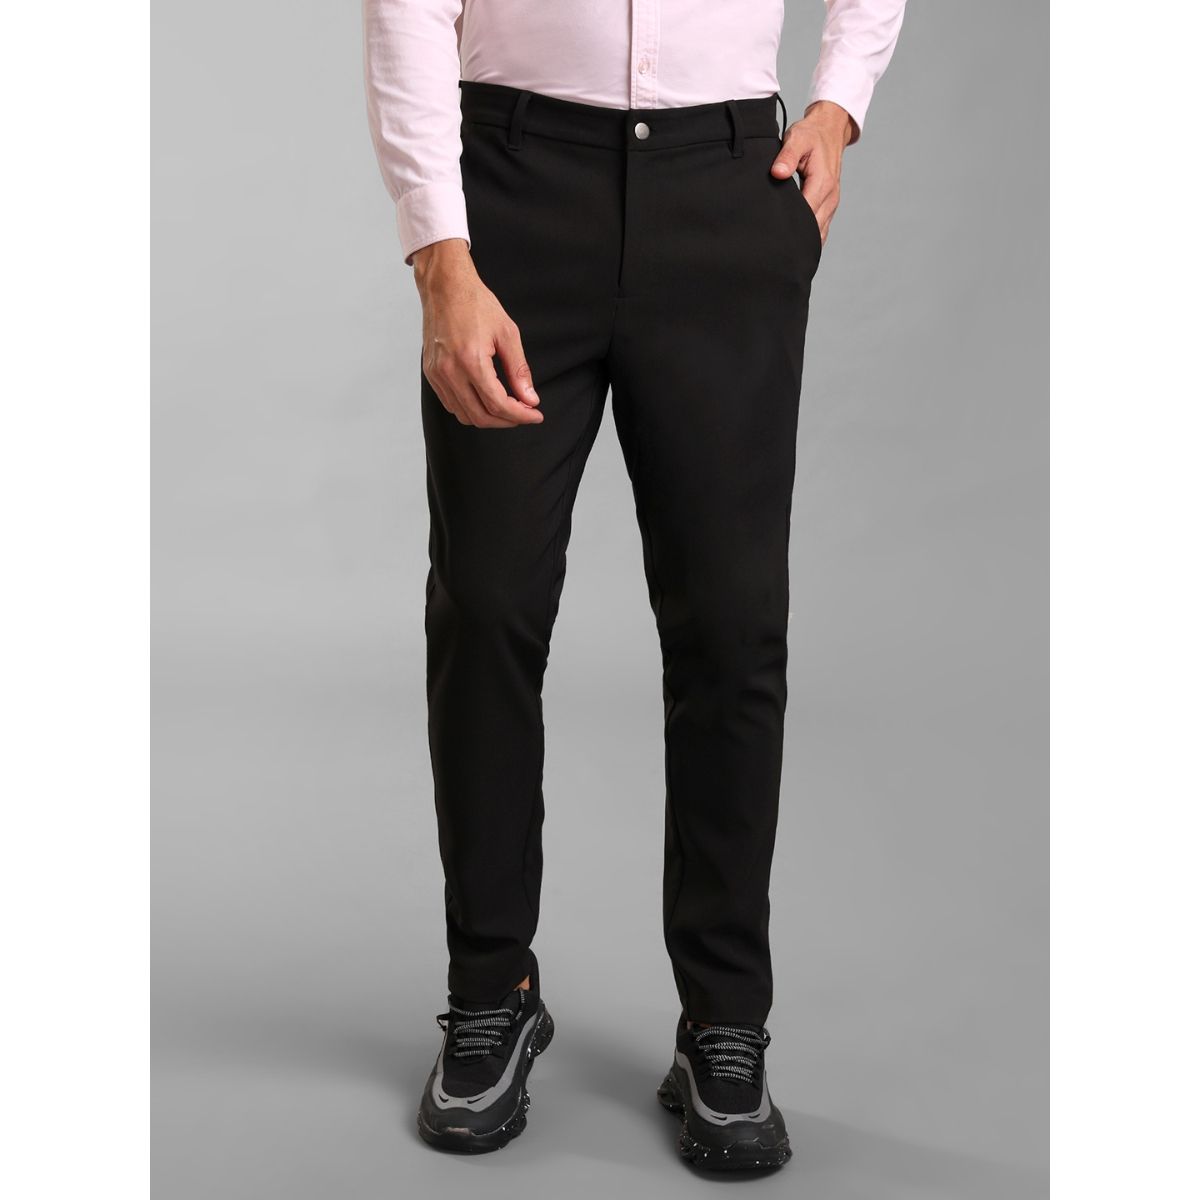 Buy Kazo Straight Fit Trouser With Pockets online